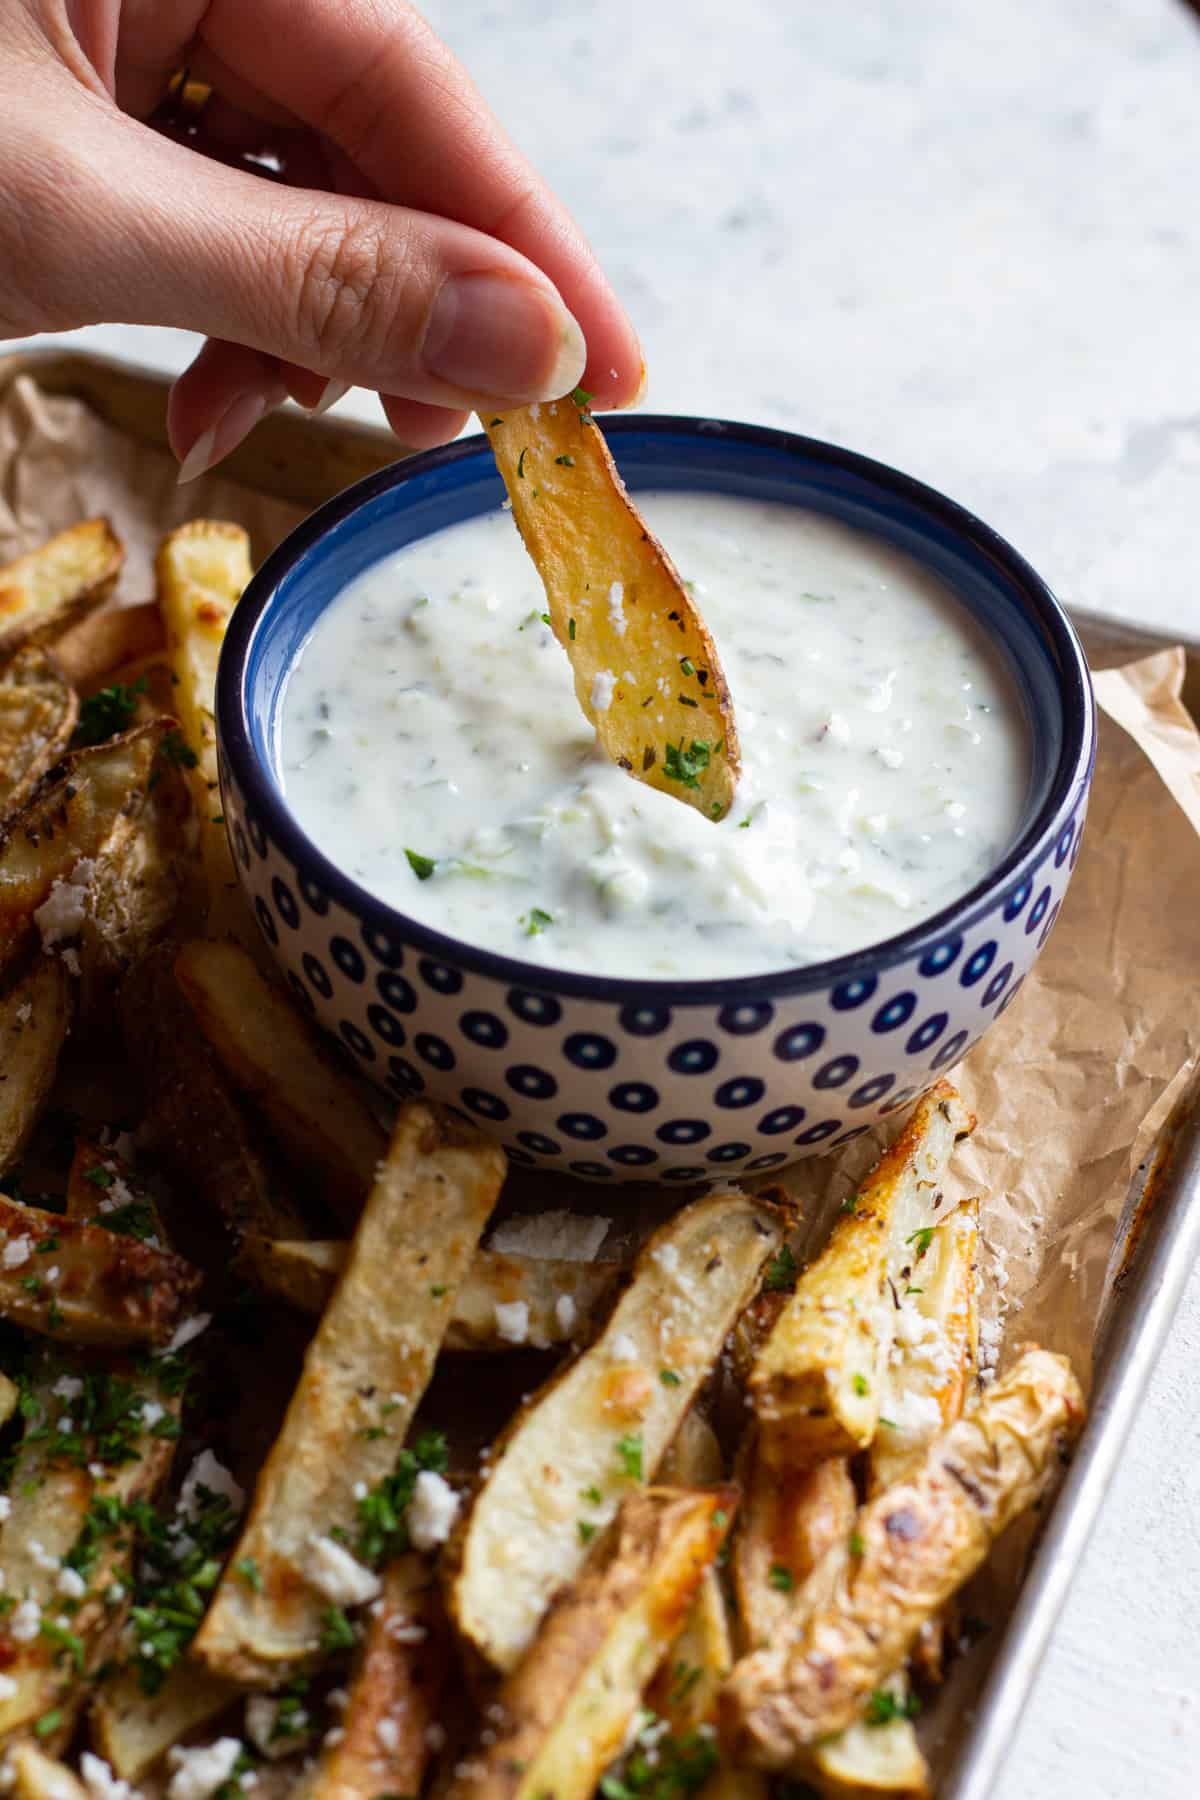 Serve the fries with some homemade tzatziki as a dip. 